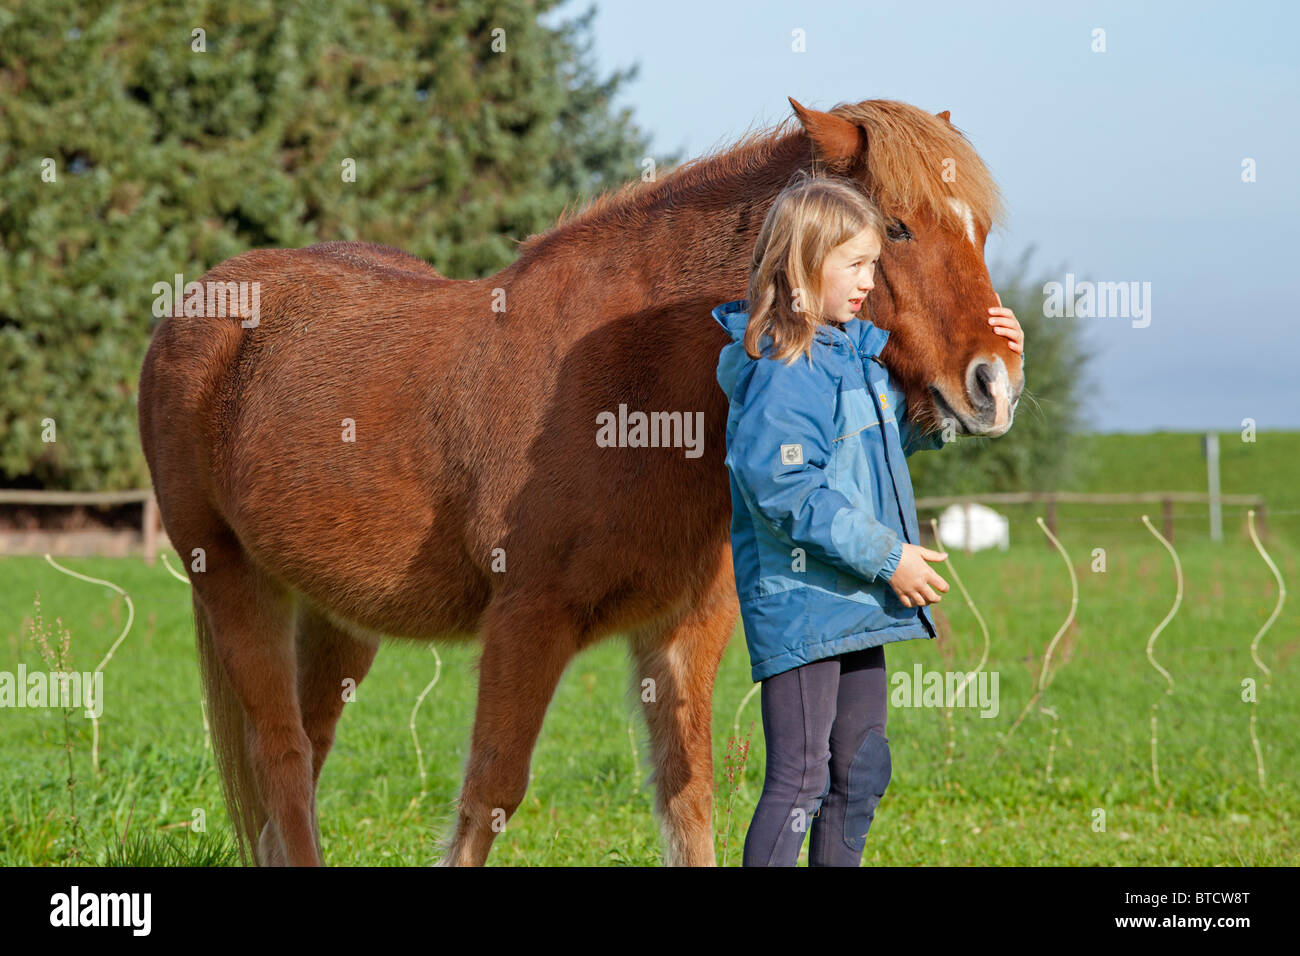 portrait of a little girl with a pony Stock Photo